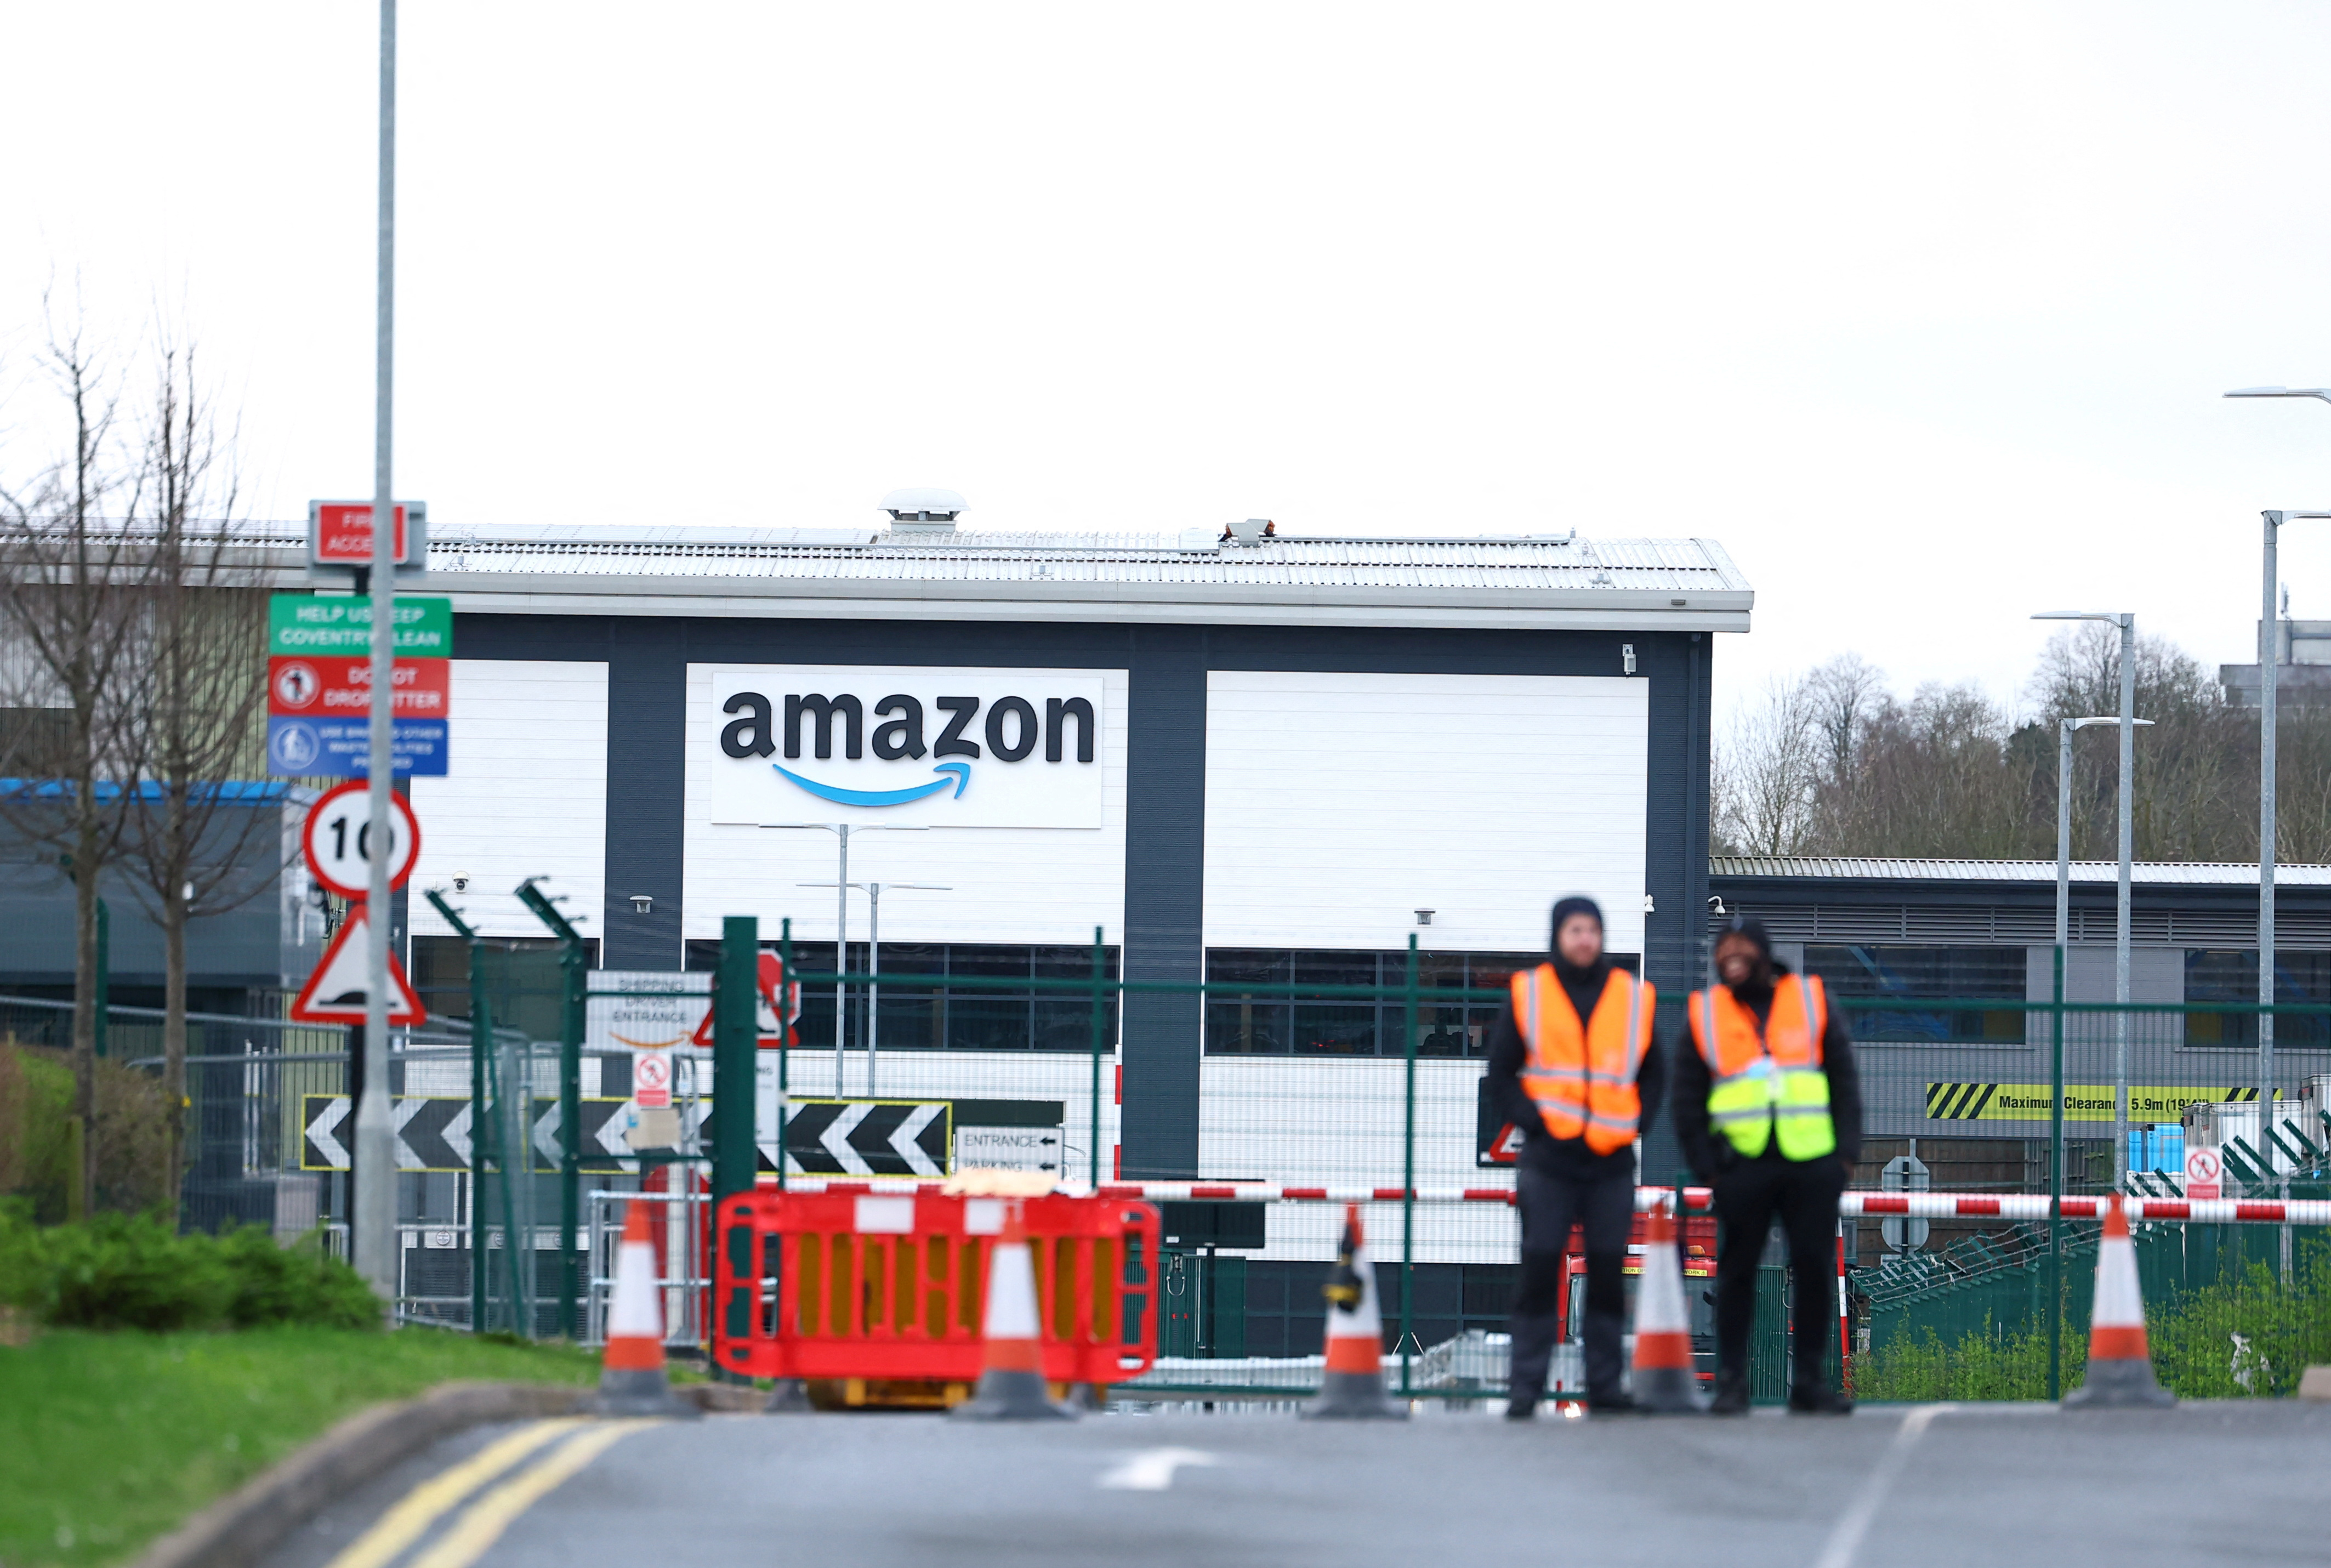 Security is seen during industrial action outside the Amazon warehouse